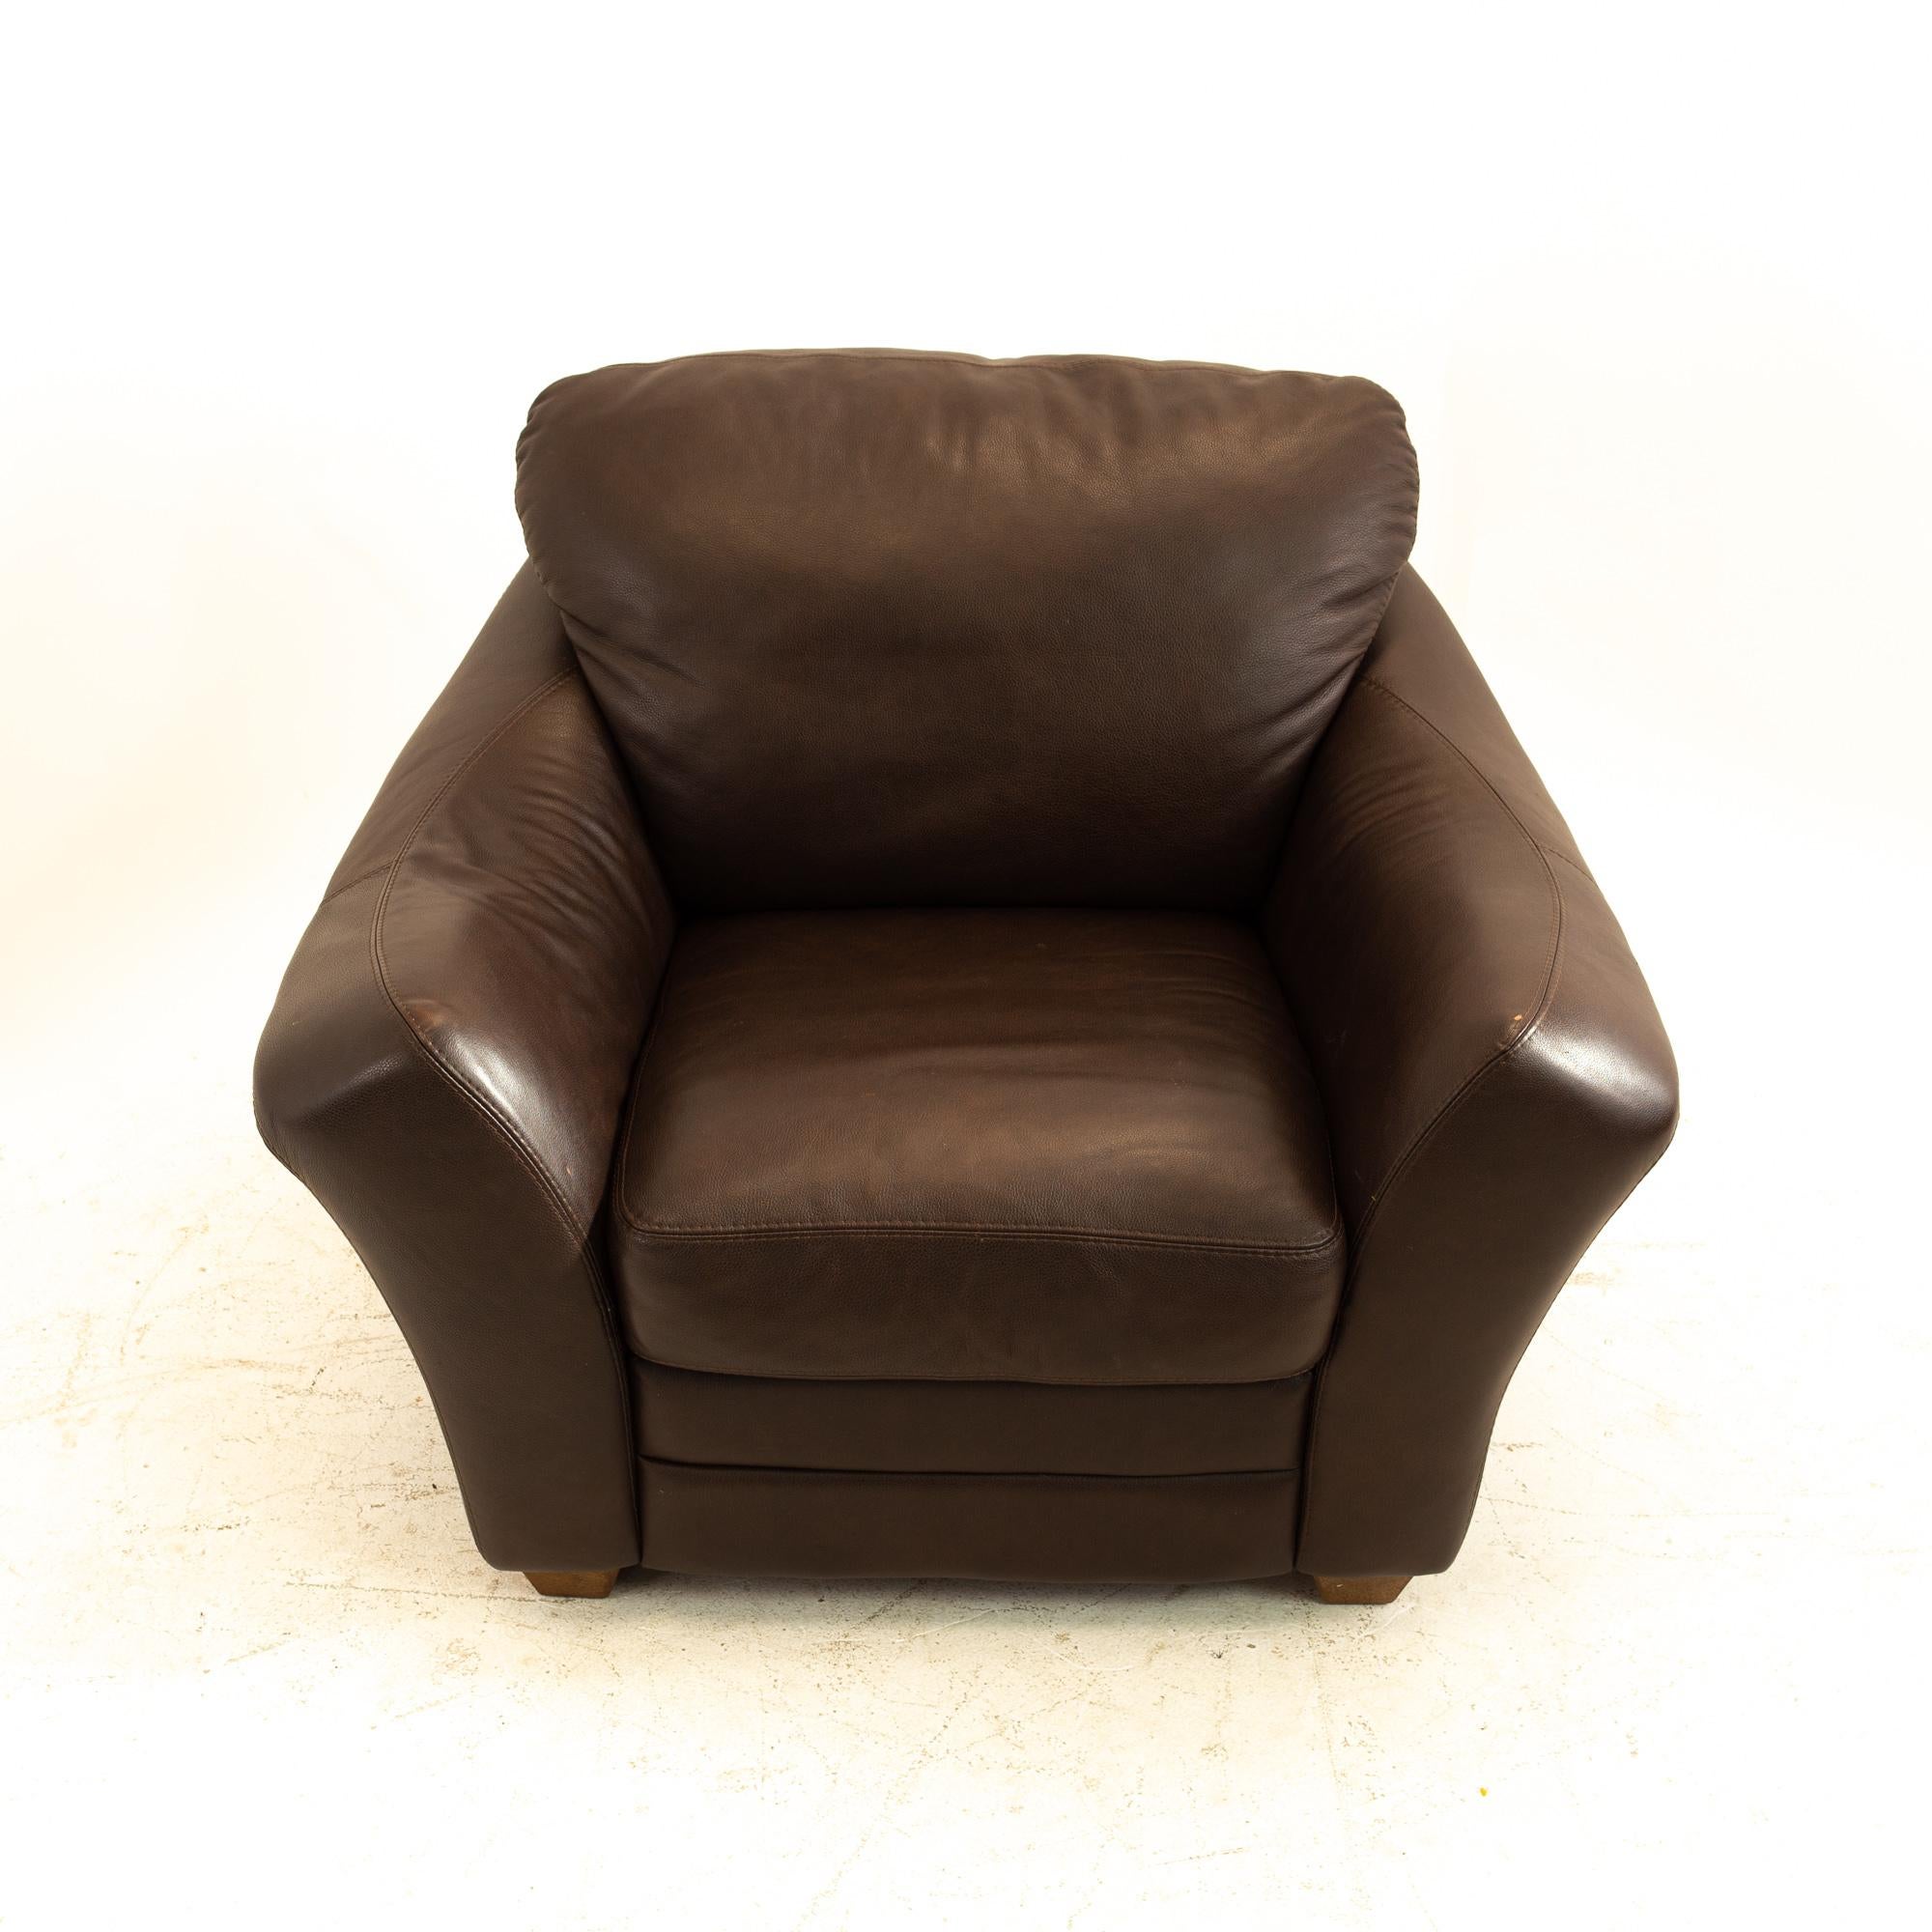 chateau d'ax leather chair